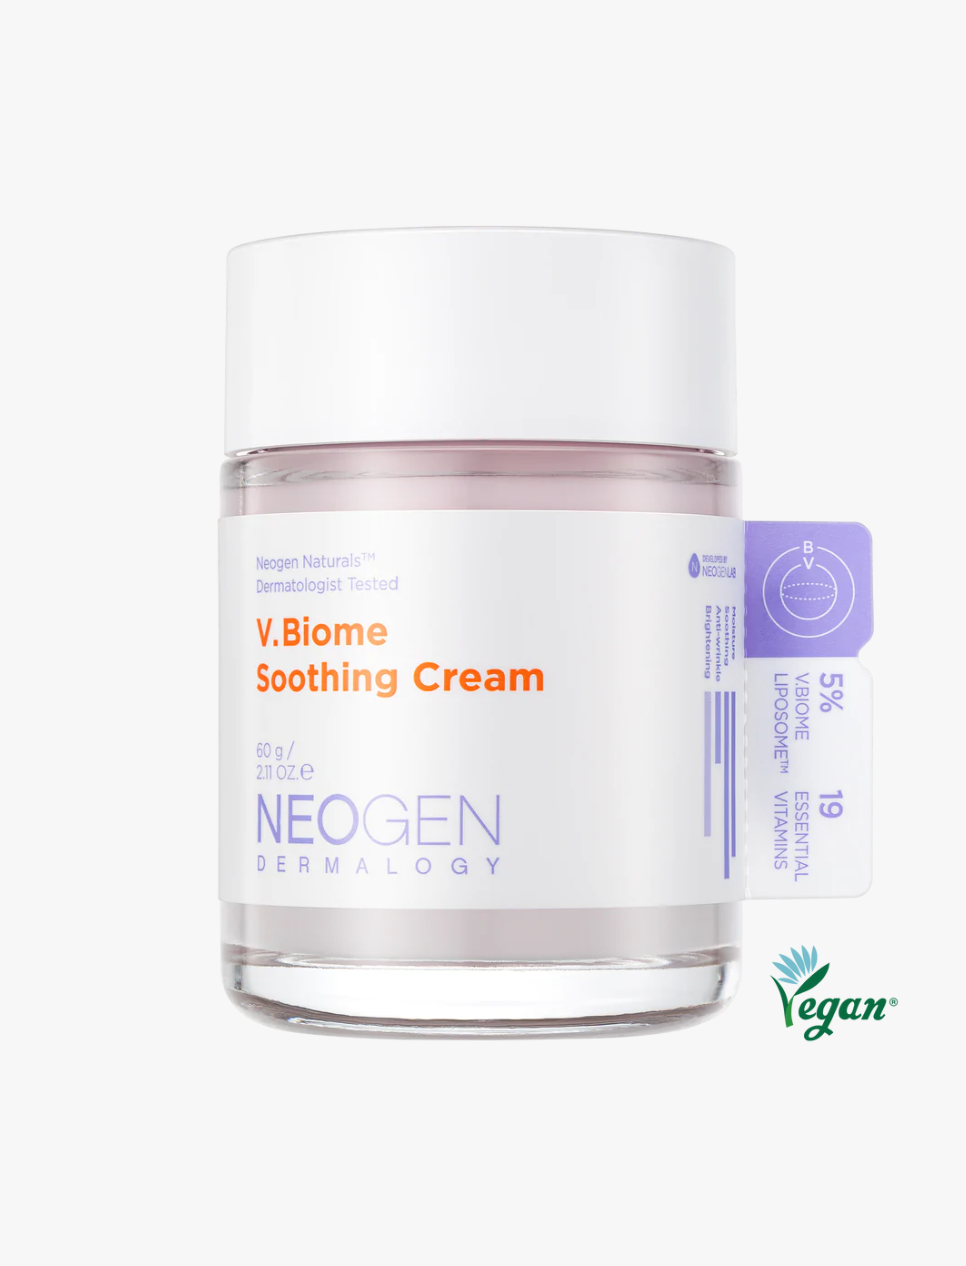 V.biome soothing cream